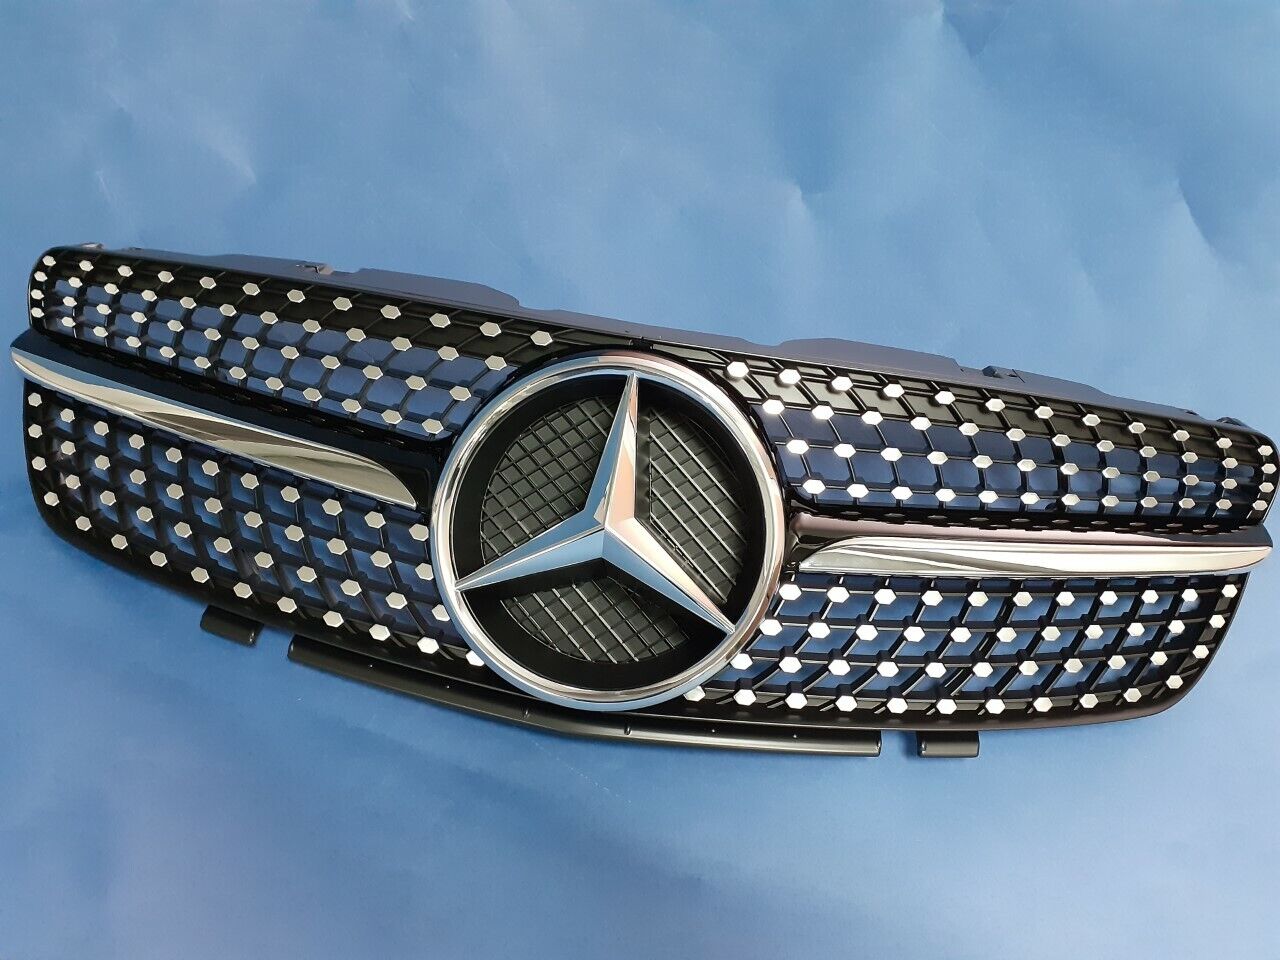 NEW CHROME DIAMOND BLACK FRONT GRILLE FOR 2002-2006 MERCEDES BENZ R230 SL-CLASS